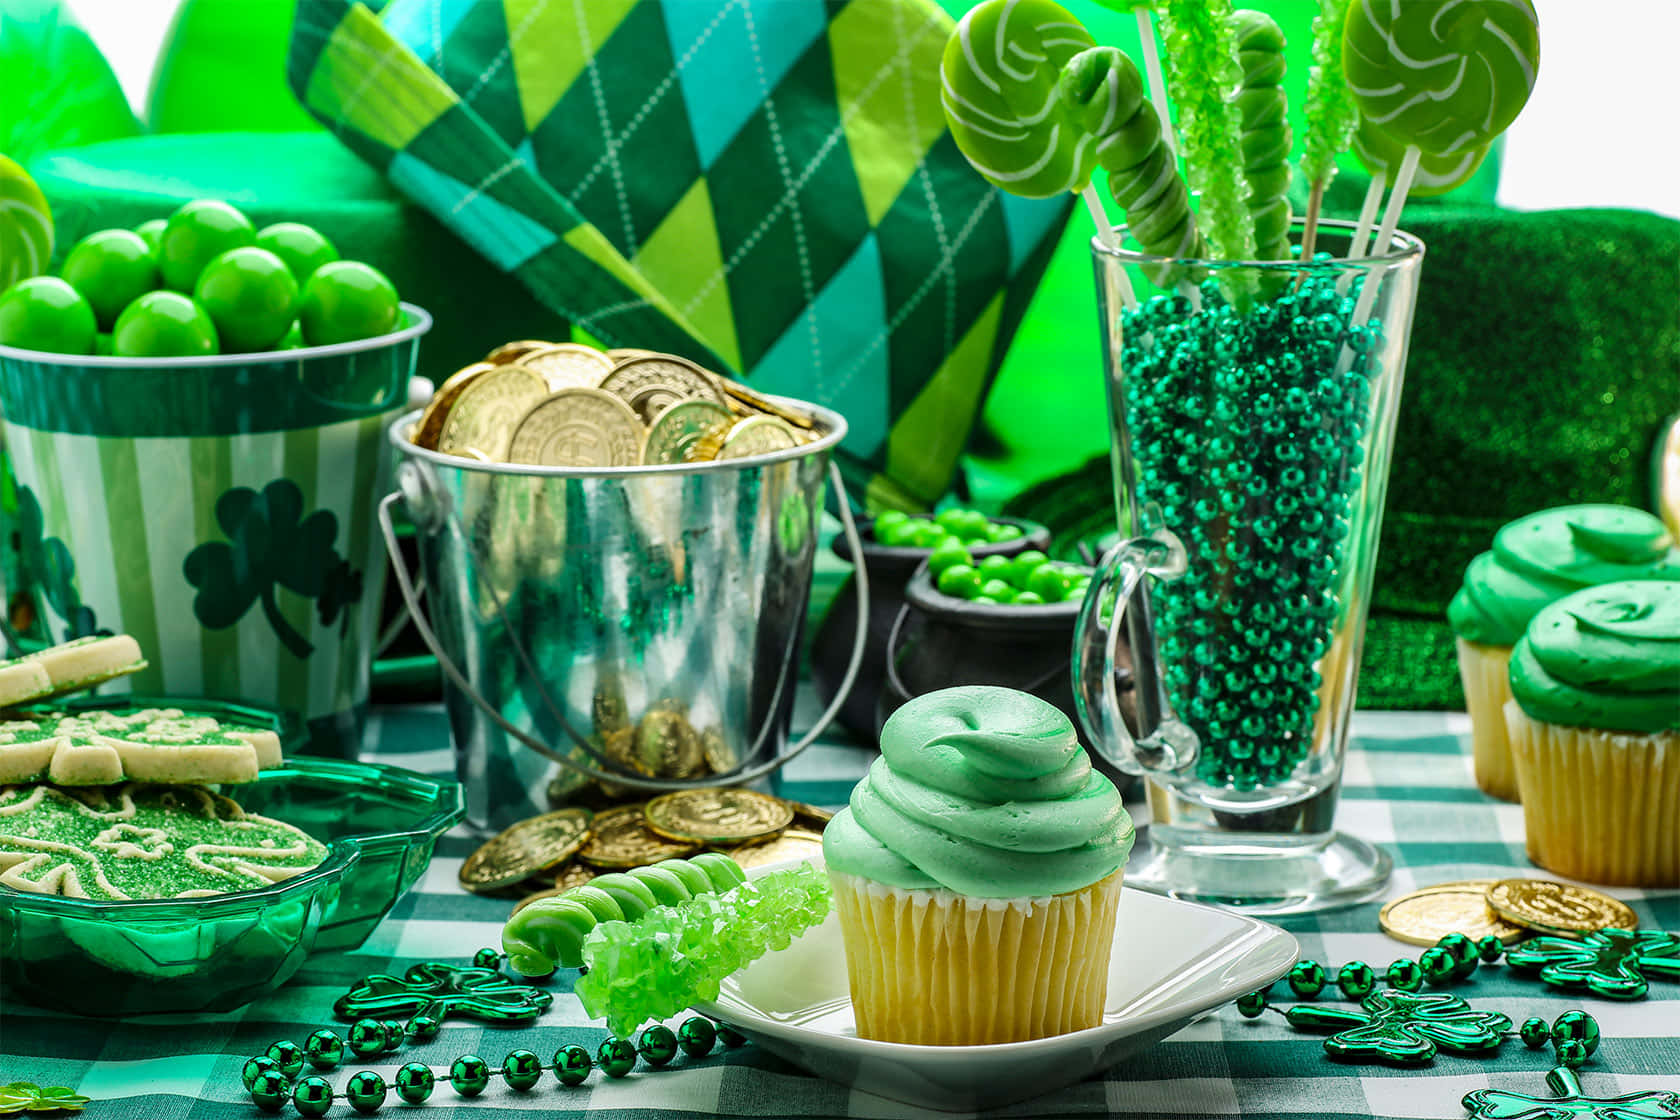 Download St Patrick's Day Party Ideas | Wallpapers.com